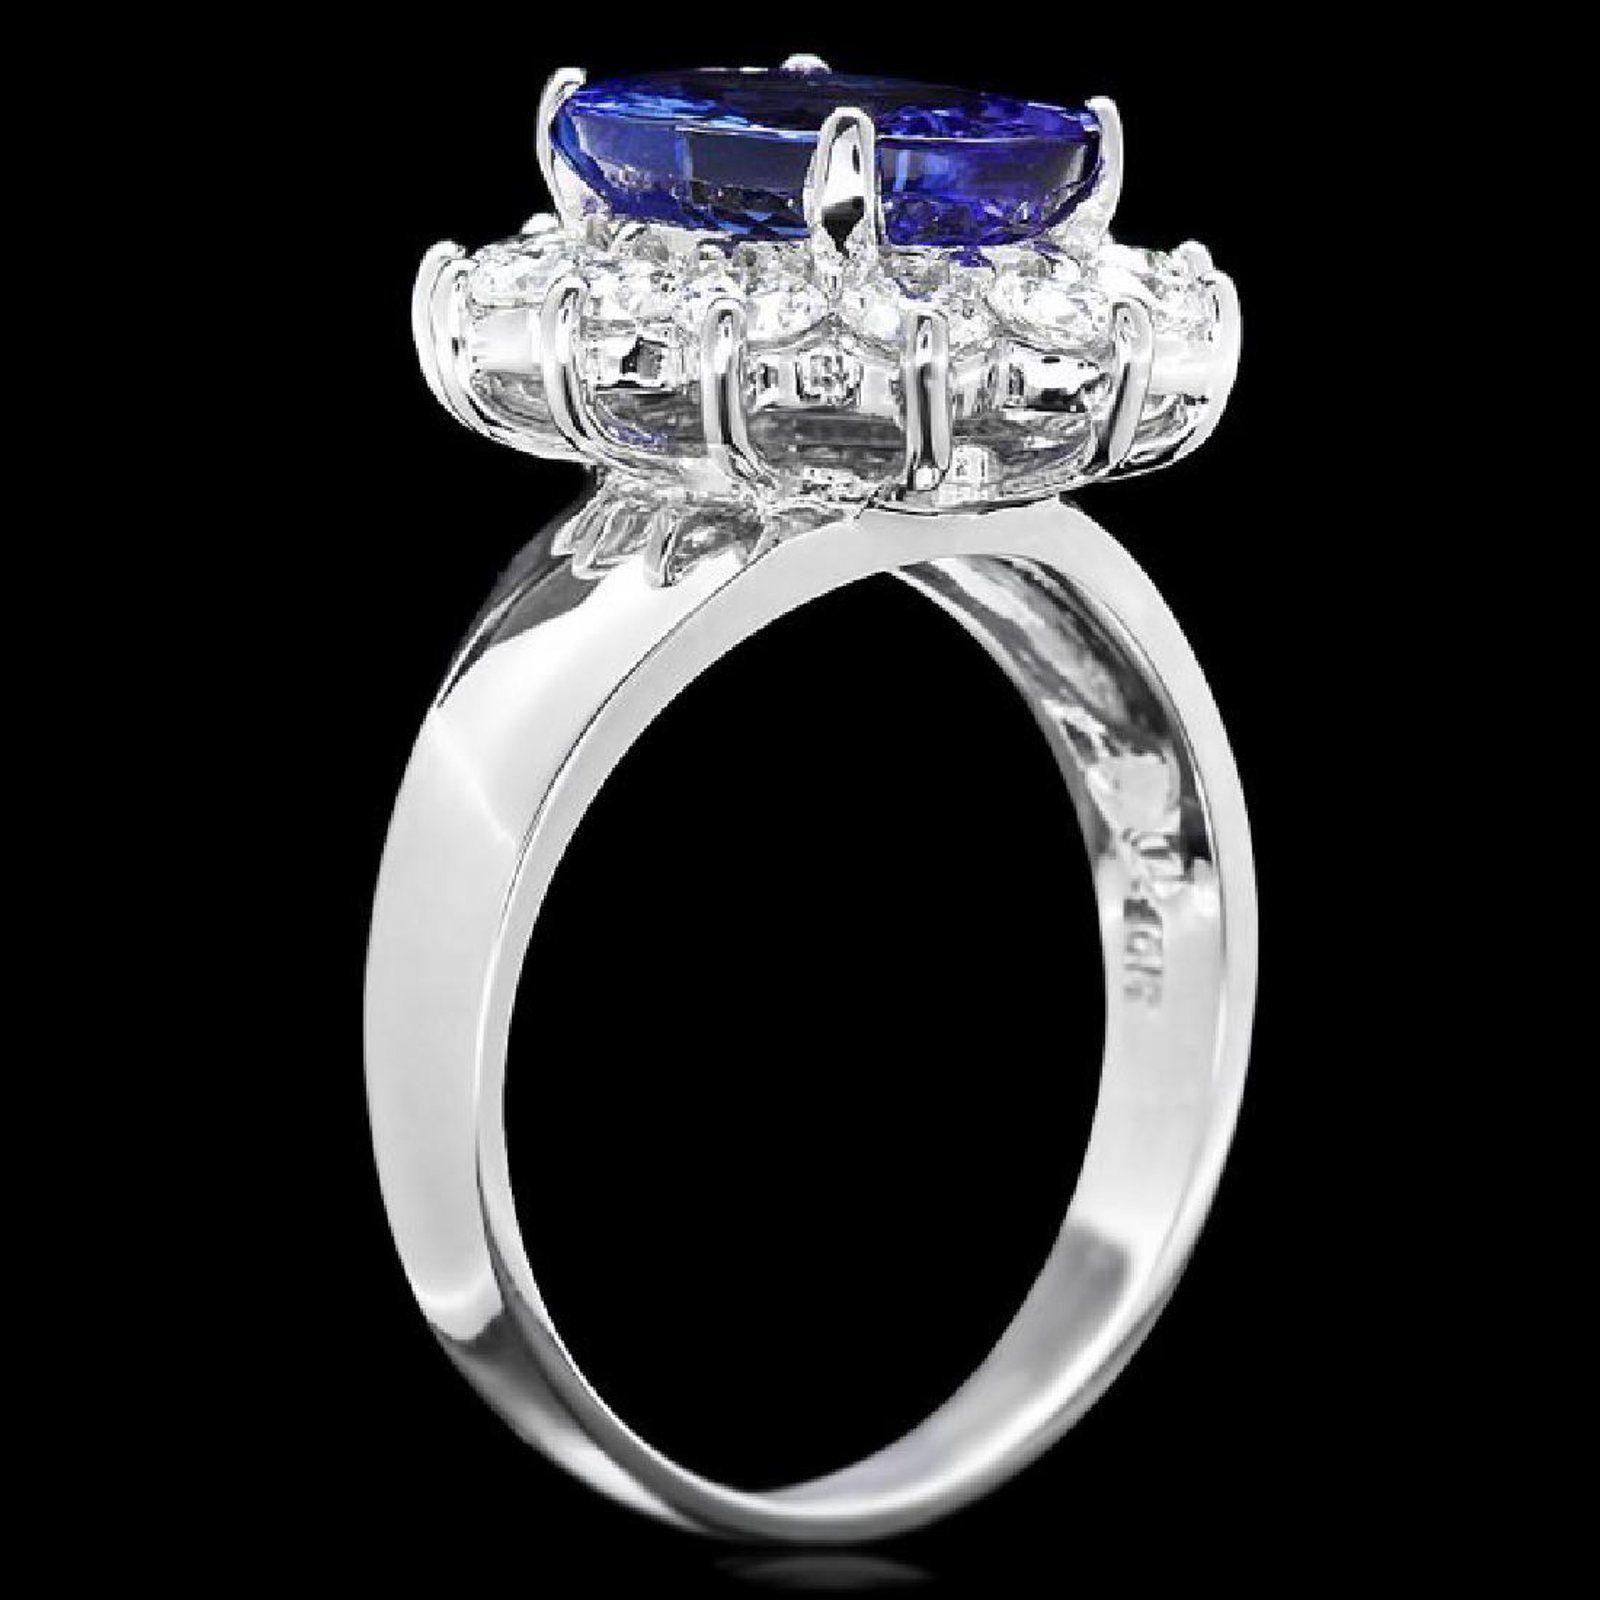 4.45 Carats Natural Very Nice Looking Tanzanite and Diamond 14K Solid White Gold Ring

Total Natural Oval Cut Tanzanite Weight is: Approx. 3.50 Carats

Tanzanite Measures: Approx. 11.00 x 9.00mm

Natural Round Diamonds Weight: Approx. 0.95 Carats